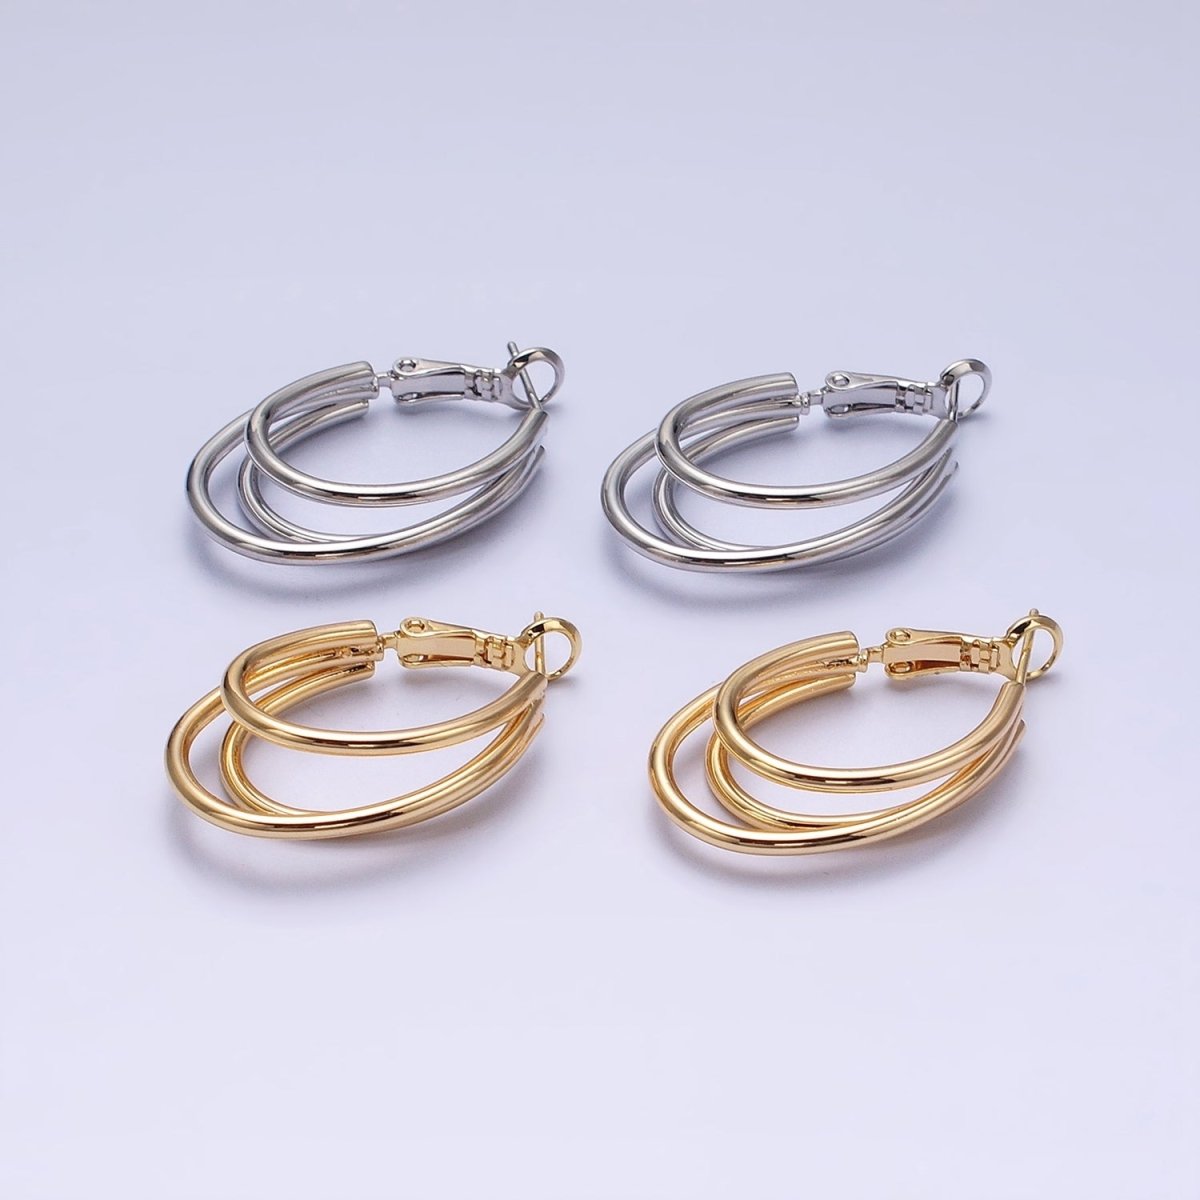 16K Gold Filled Triple Band Oblong Hinge Hoop Earrings in Gold & Silver | AD847 AD848 - DLUXCA